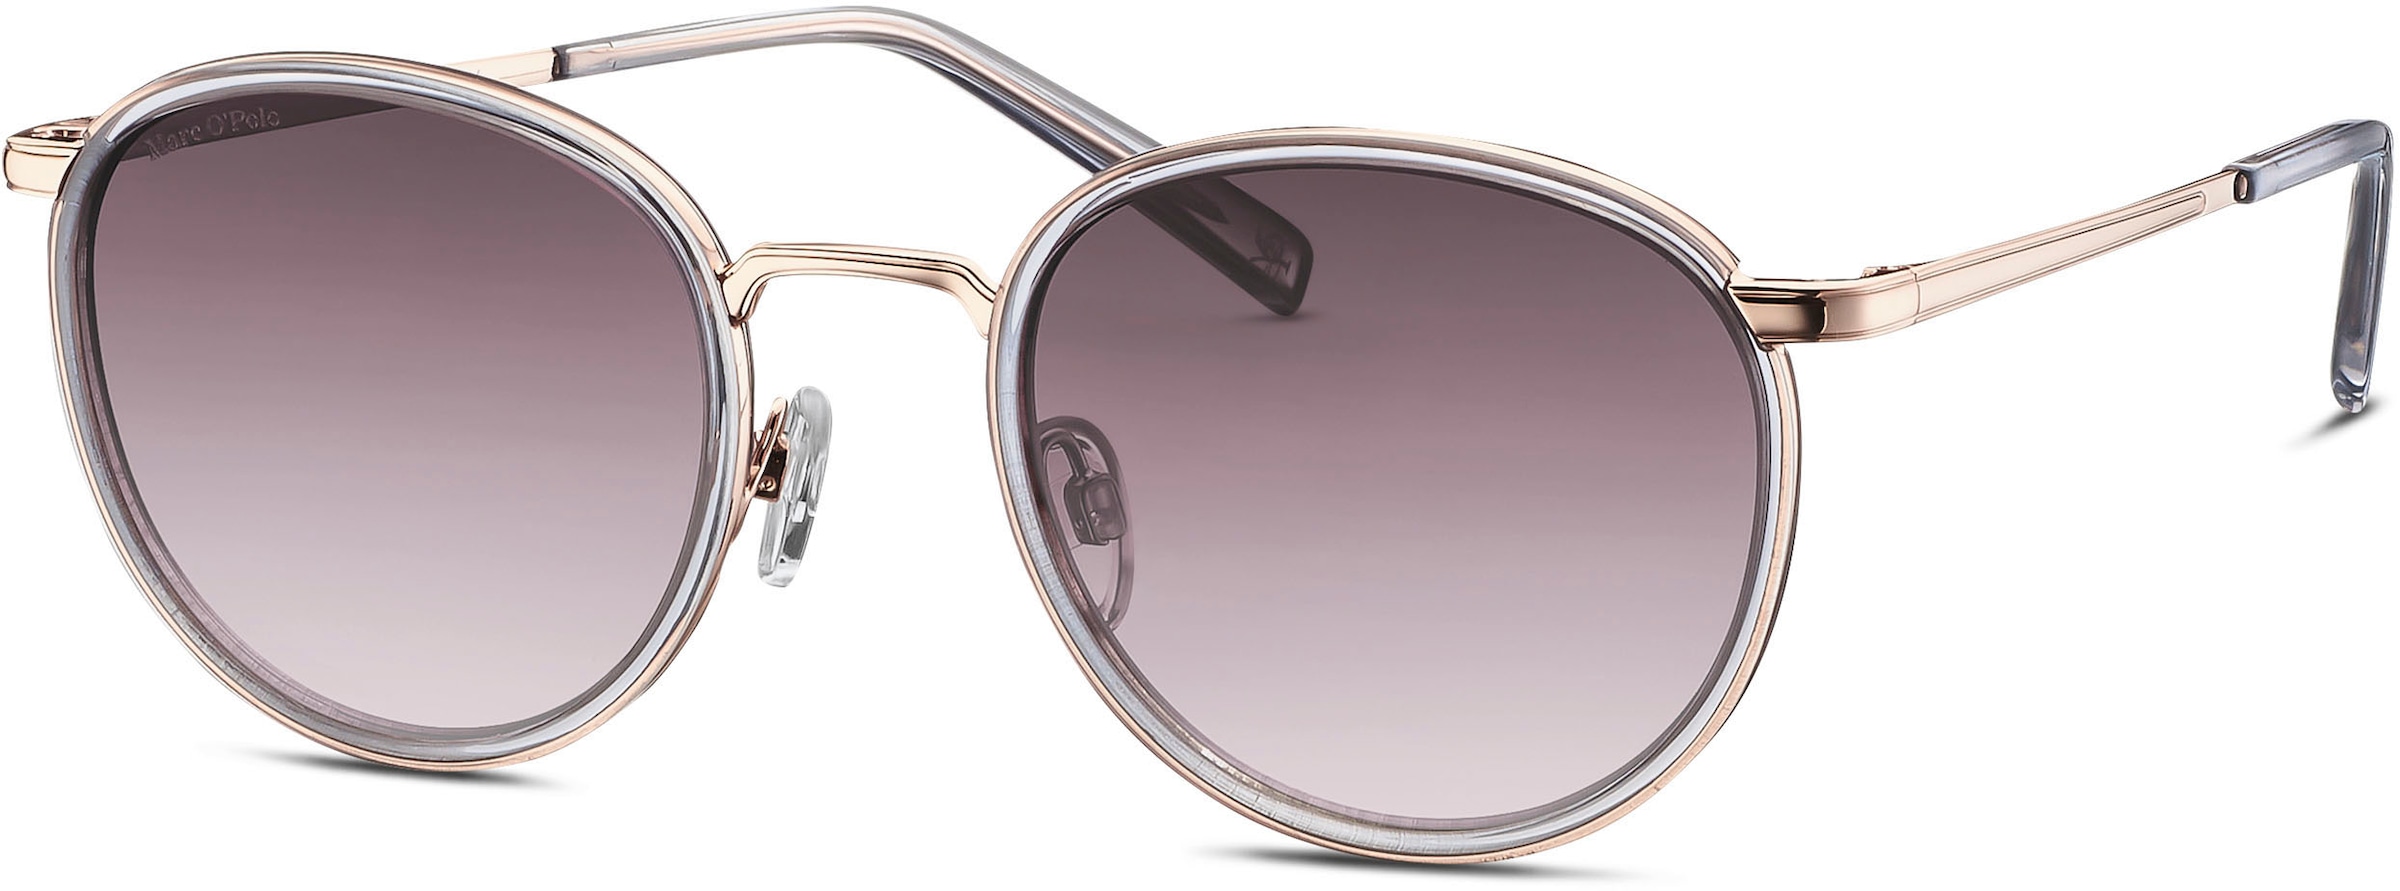 Marc O'Polo Sonnenbrille »Modell 505105«, Panto-Form online bei OTTO